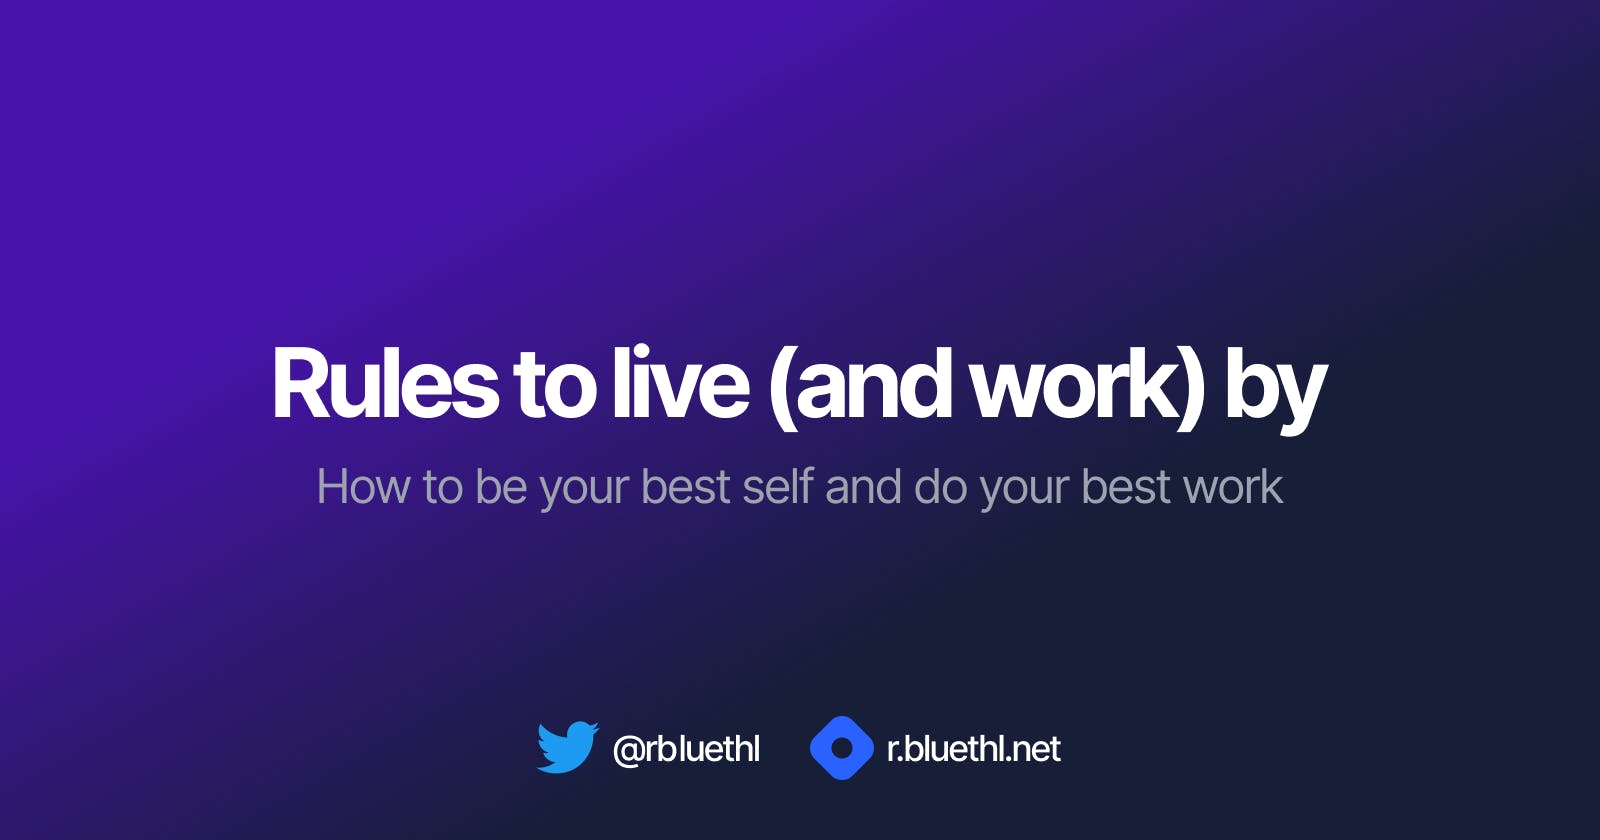 Rules to live (and work) by